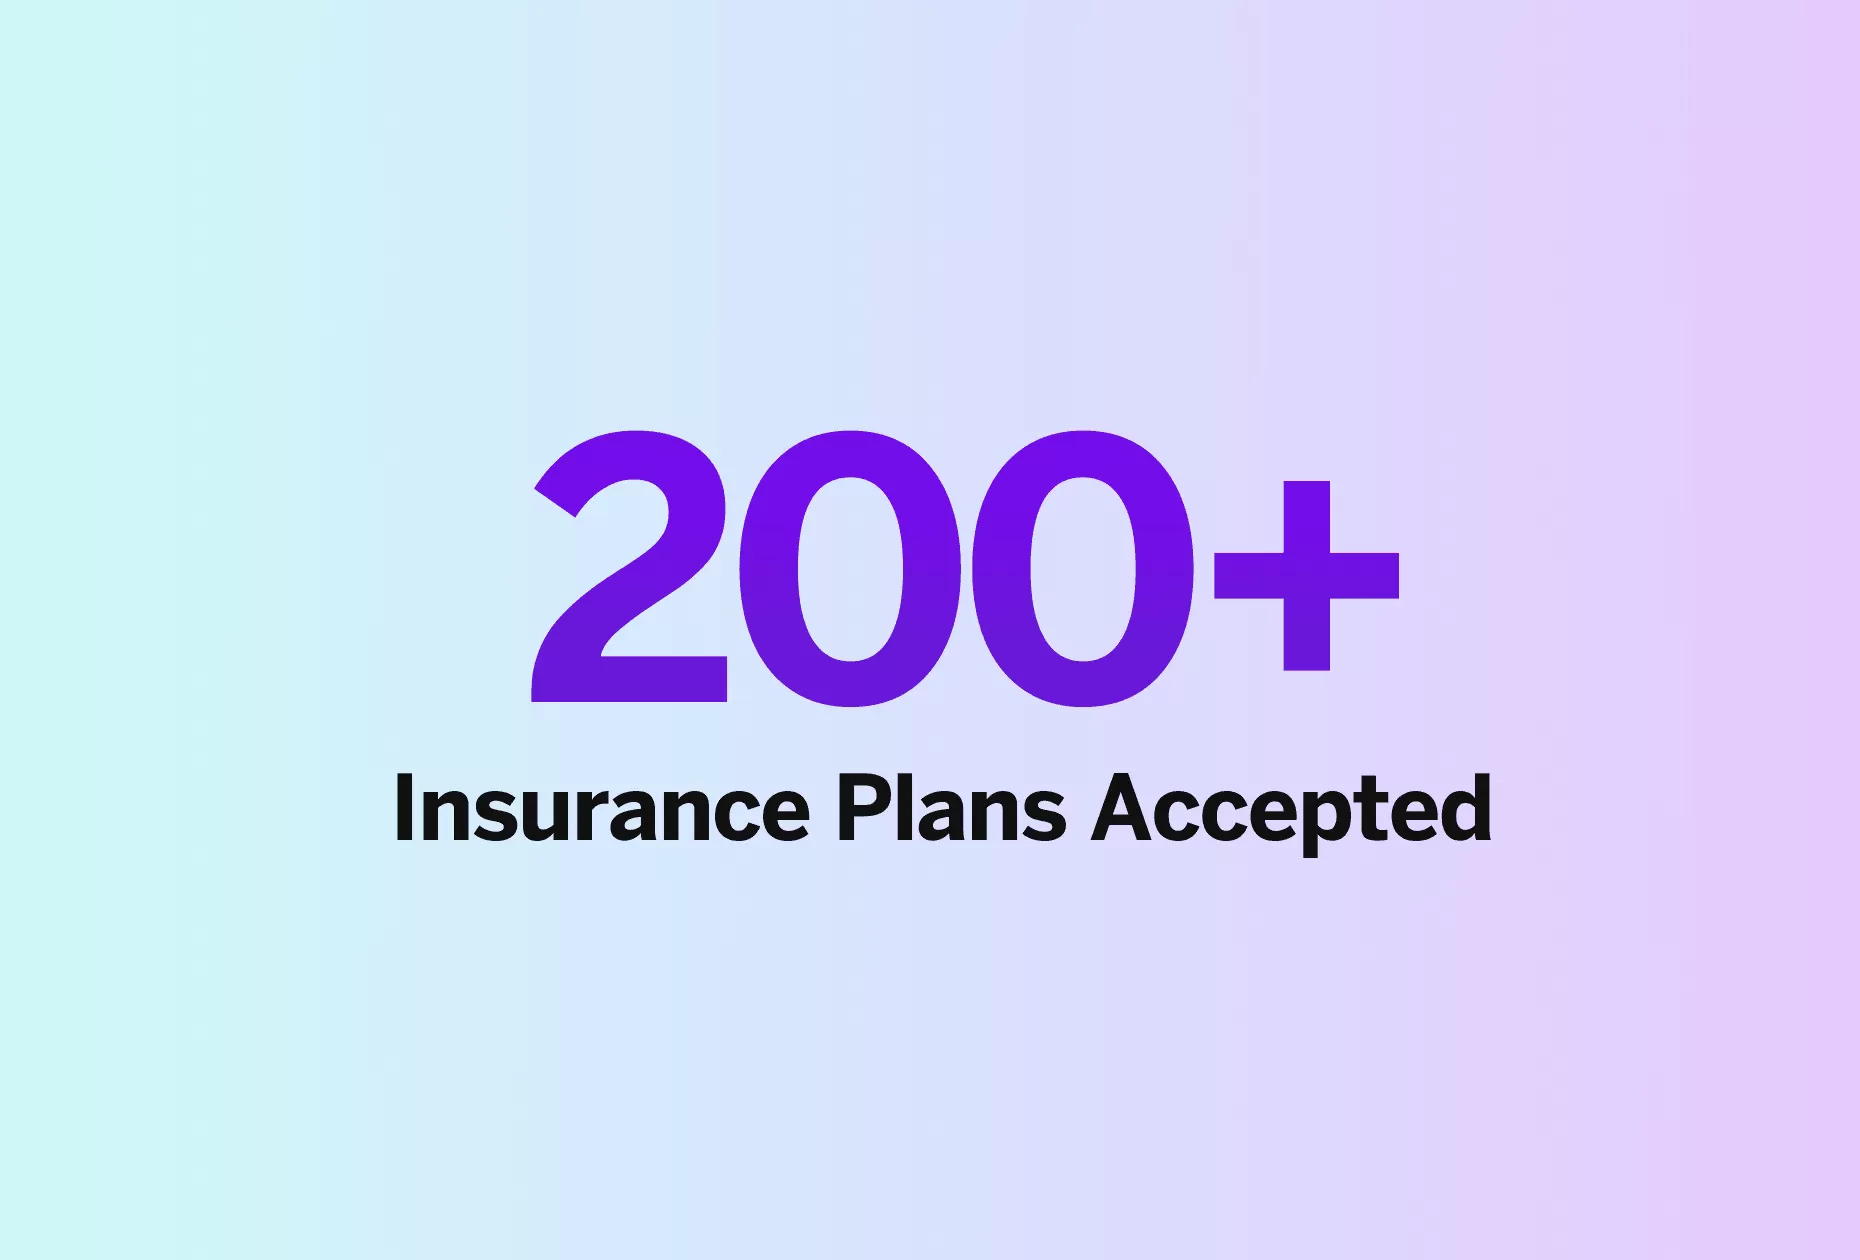 Infographic showing 200+ insurance plans accepted